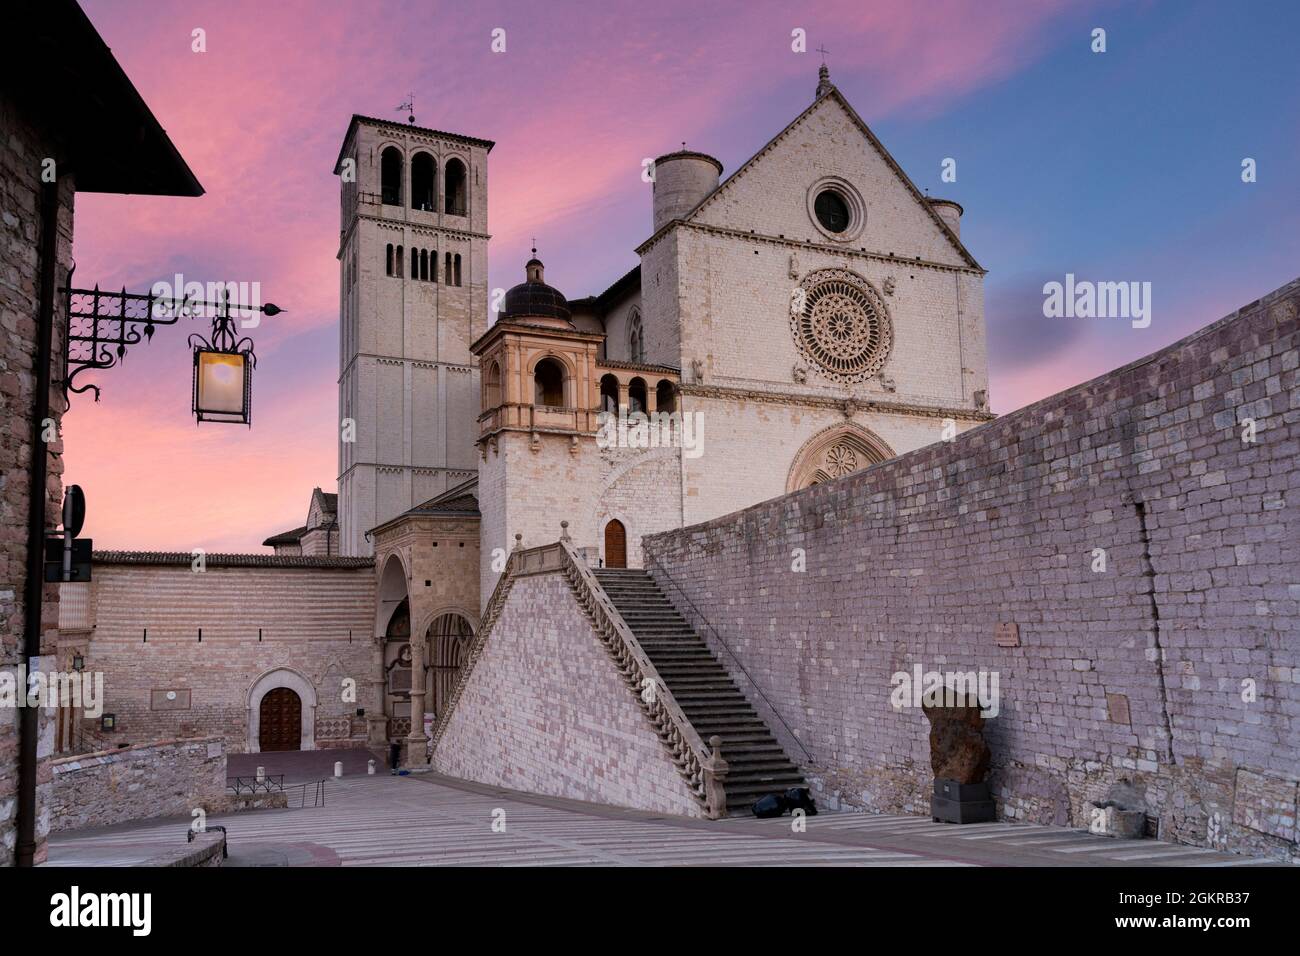 Old town of Assisi and Basilica di San Francesco, UNESCO World Heritage Site, at dawn, Assisi, Perugia province, Umbria, Italy, Europe Stock Photo